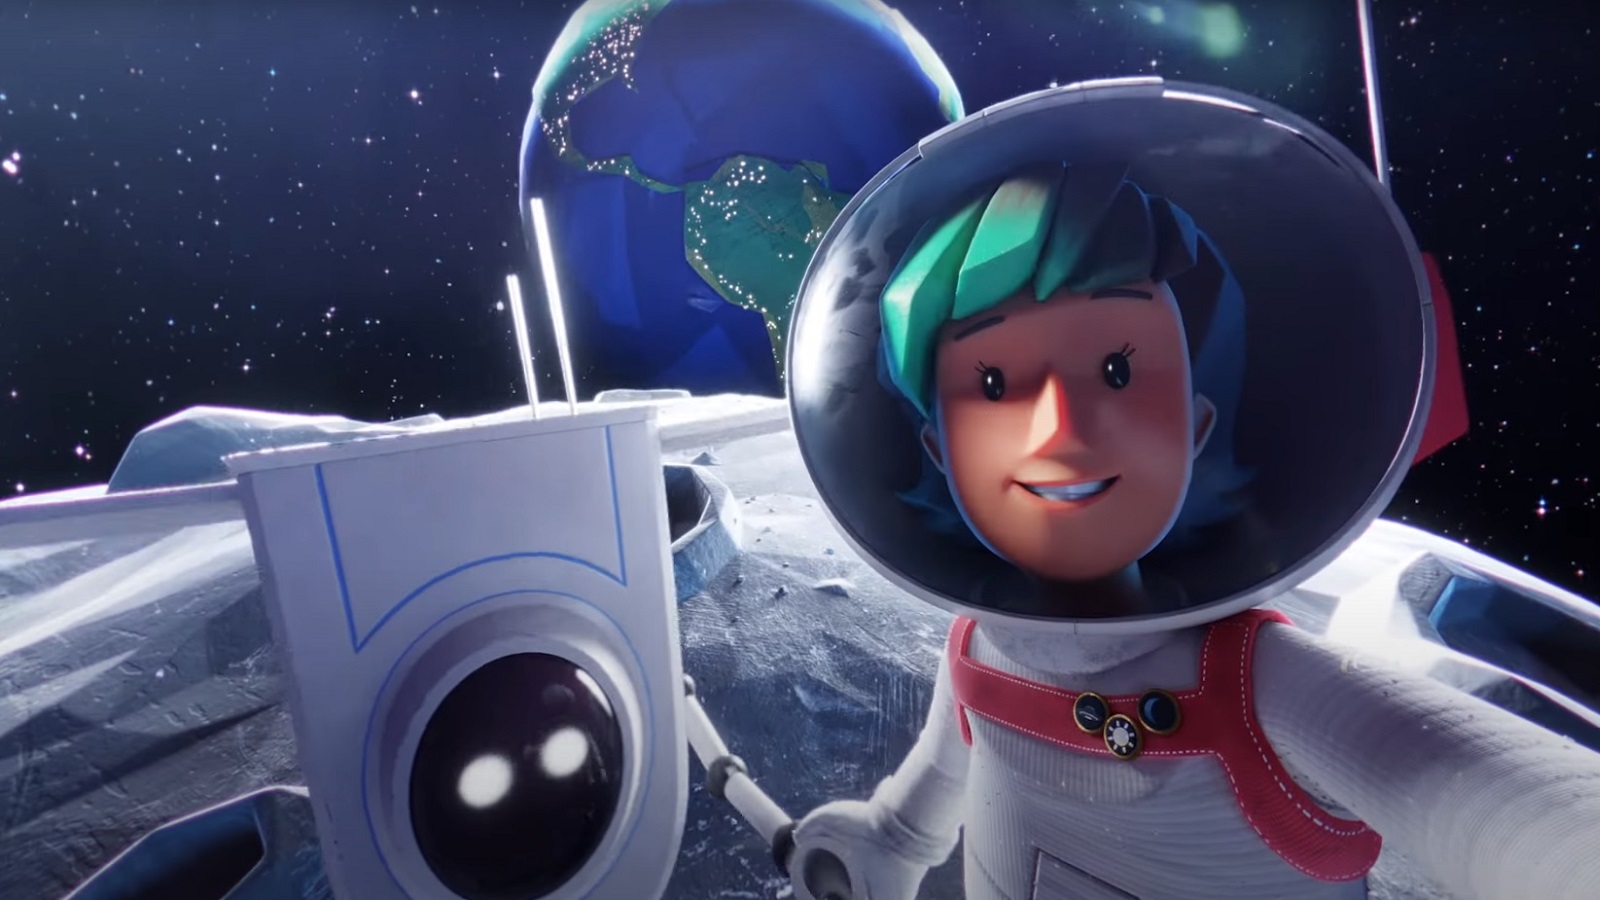 Future Space Explorer Digitally Salutes the Earth from Outer Space